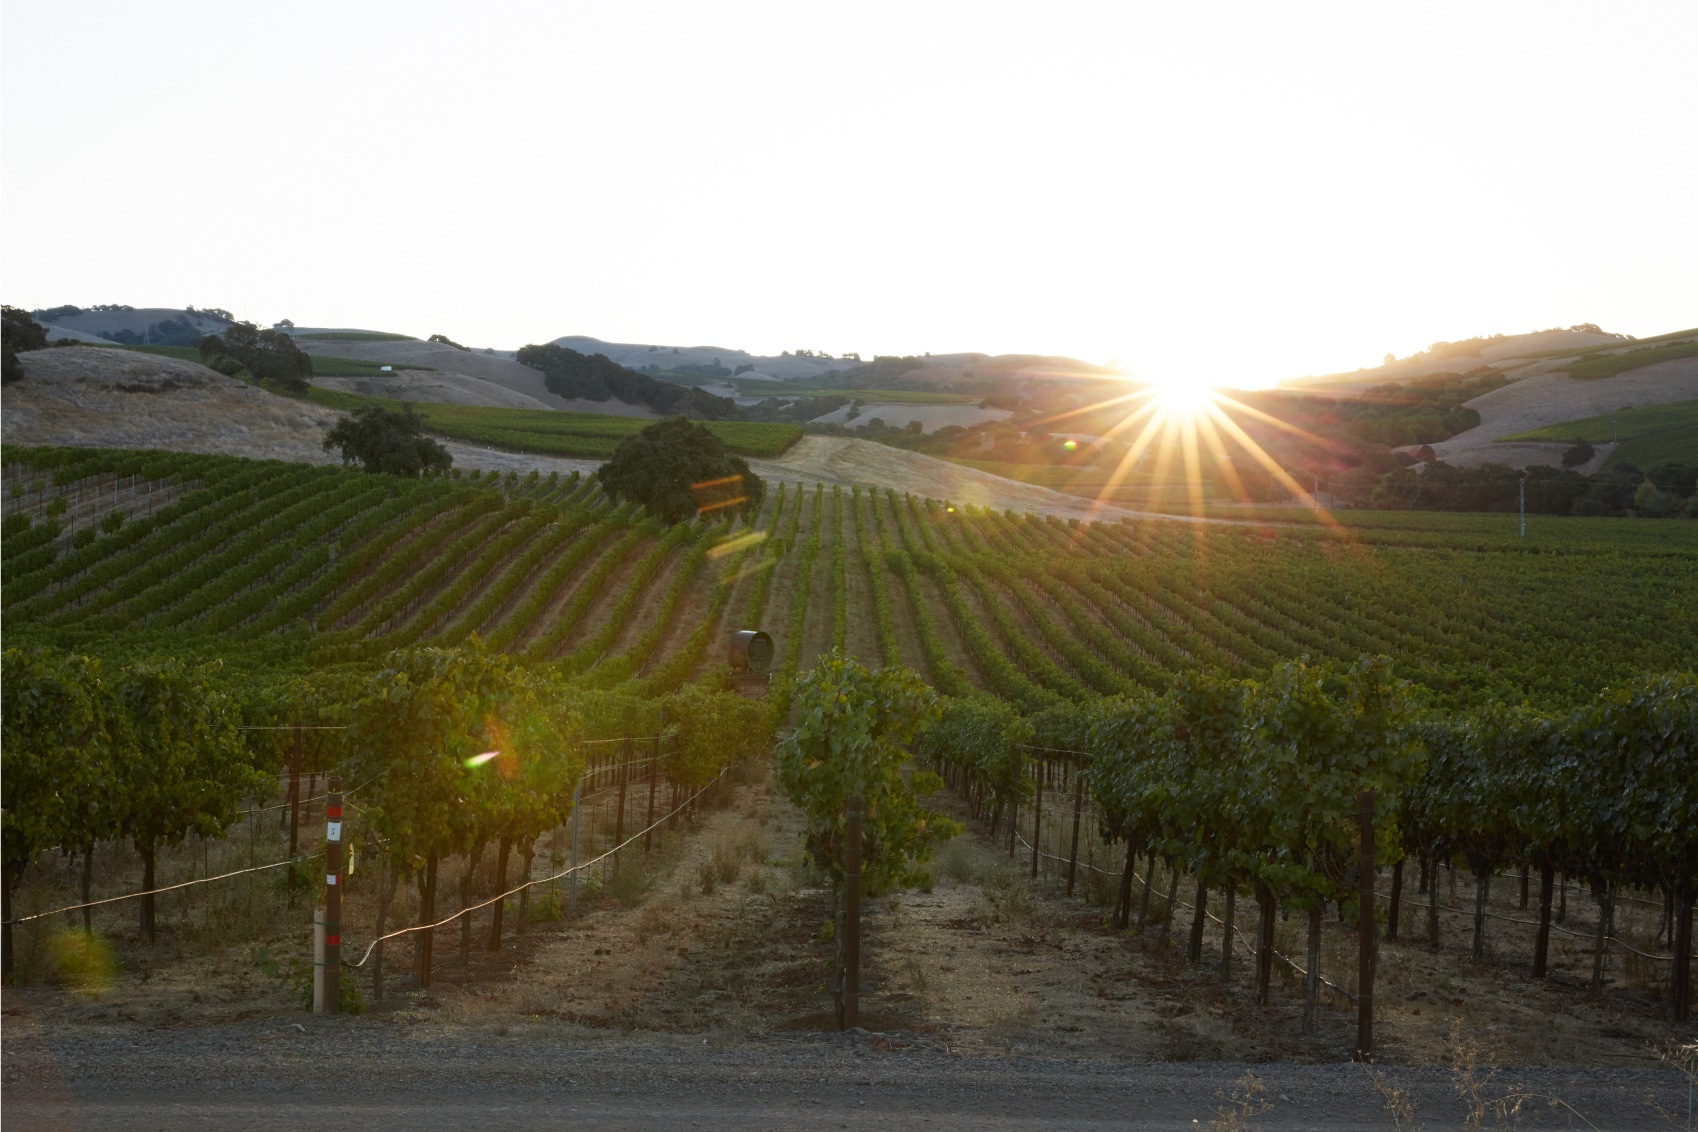 The sun setting behind the rows of vines in the vineyards of Joel Gott Wines